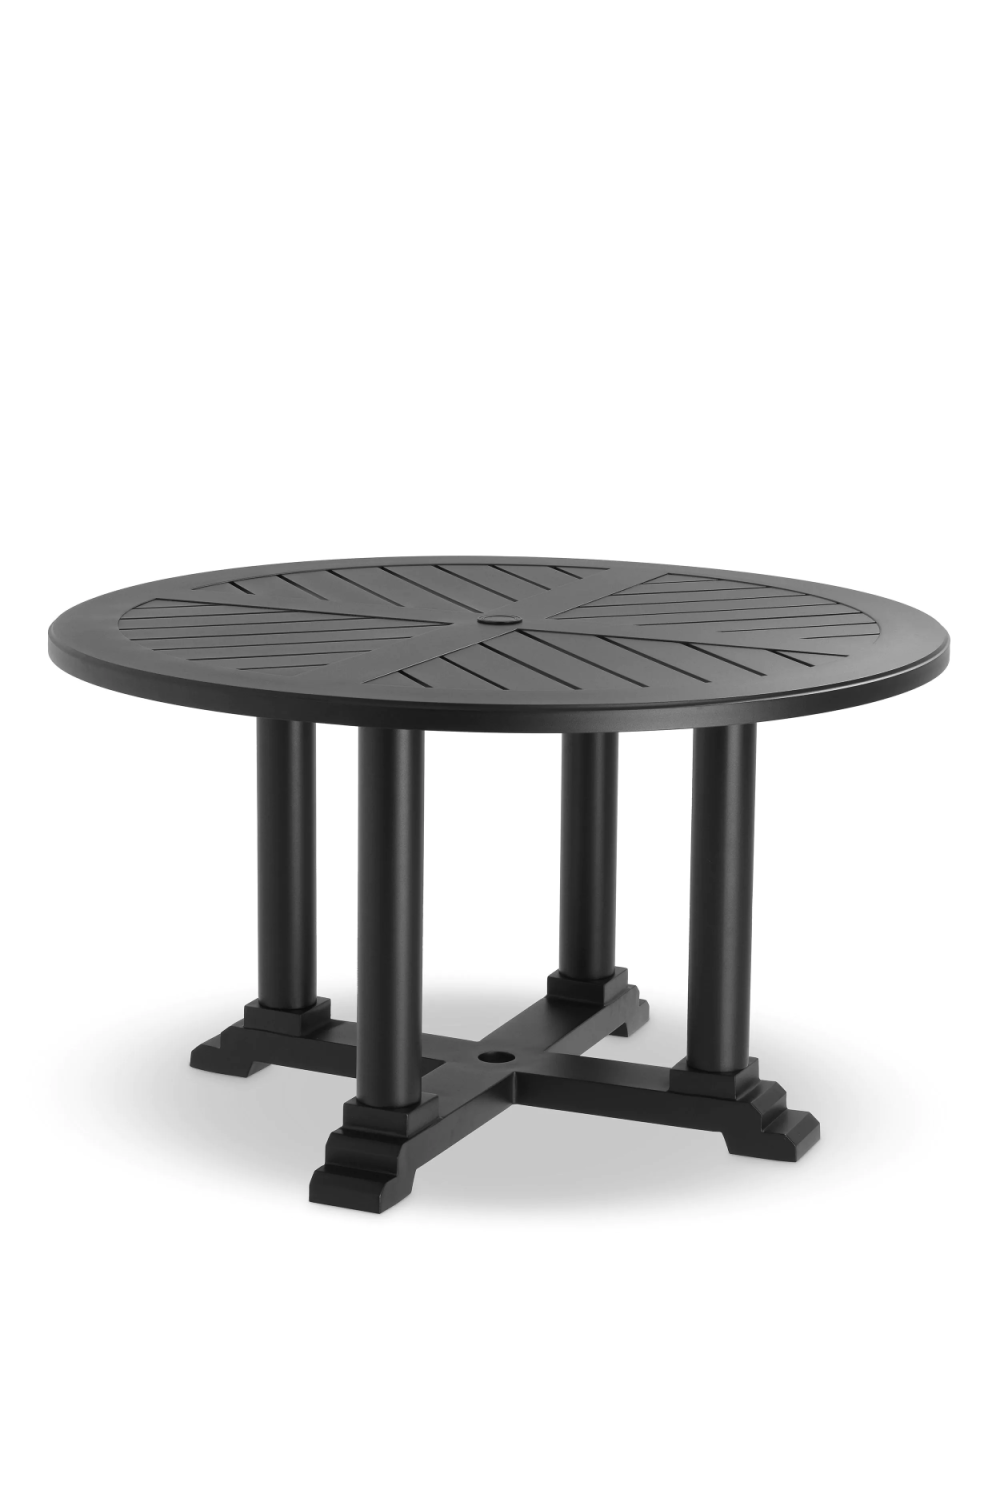 Black Round Outdoor Dining Table | Eichholtz Bell Rive S | Oroatrade.com